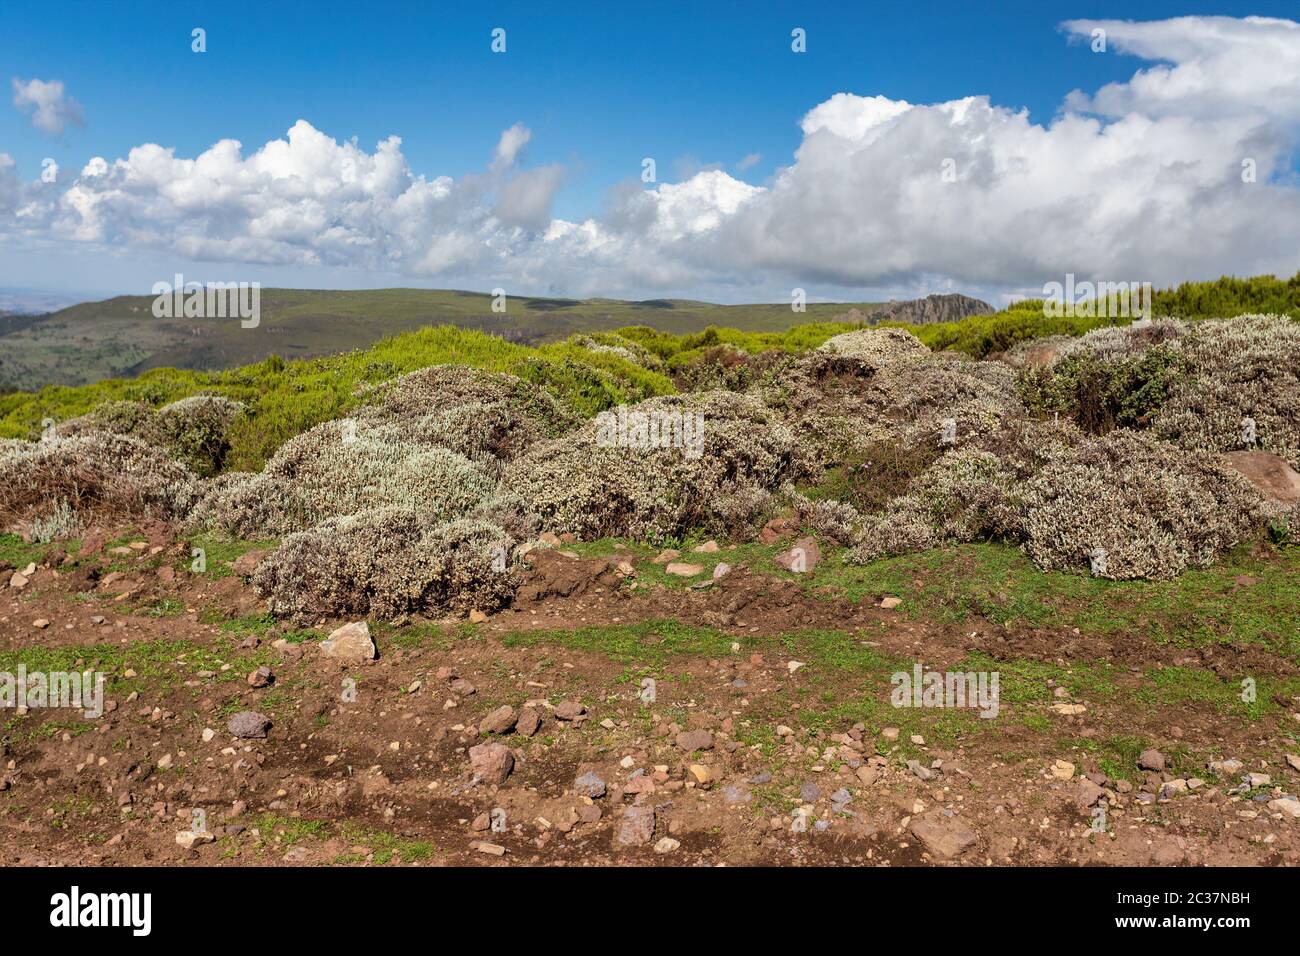 Ethiopian Bale Mountains National Park landscape. Wilderness sunny day with blue sky. Ethiopia, Africa Stock Photo -